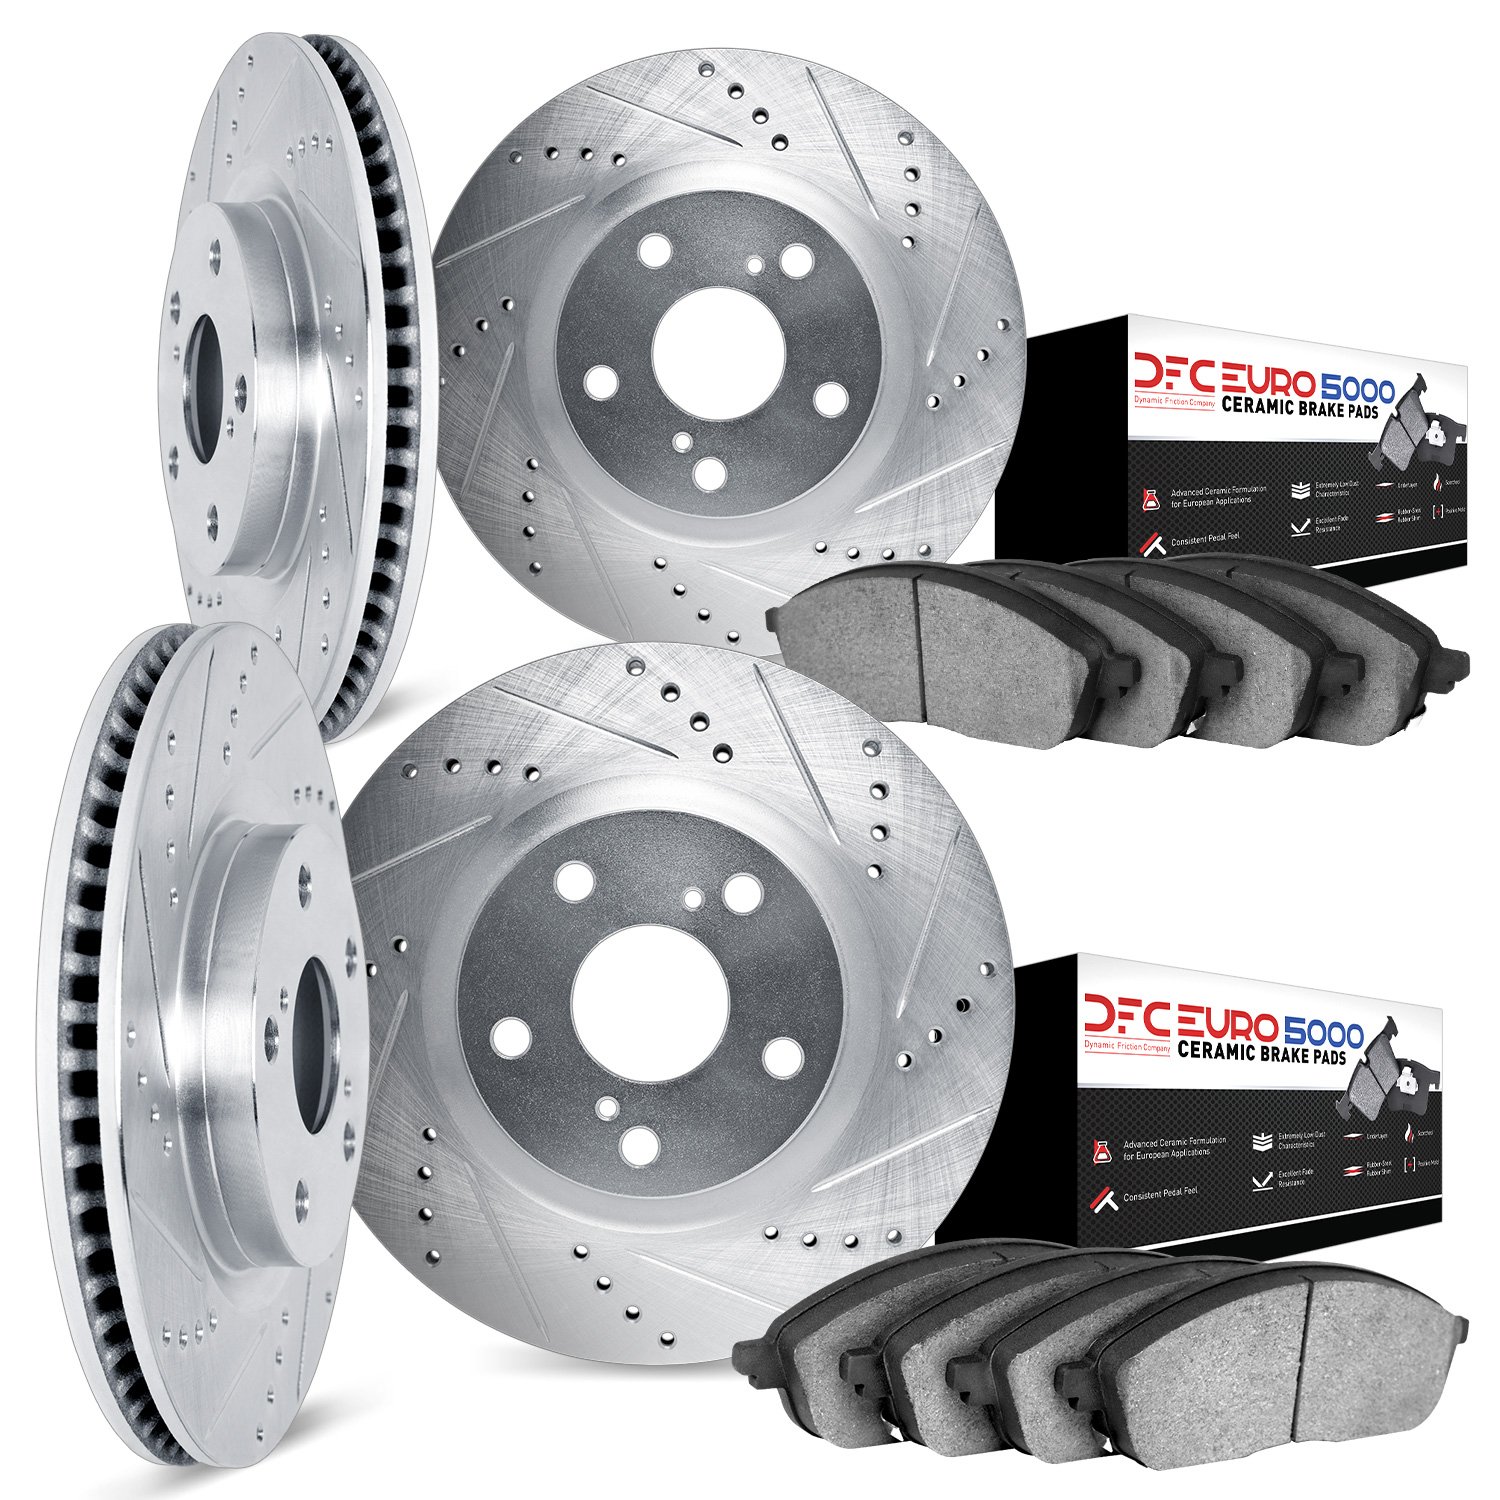 7604-65002 Drilled/Slotted Brake Rotors w/5000 Euro Ceramic Brake Pads Kit [Silver], 2002-2010 GM, Position: Front and Rear